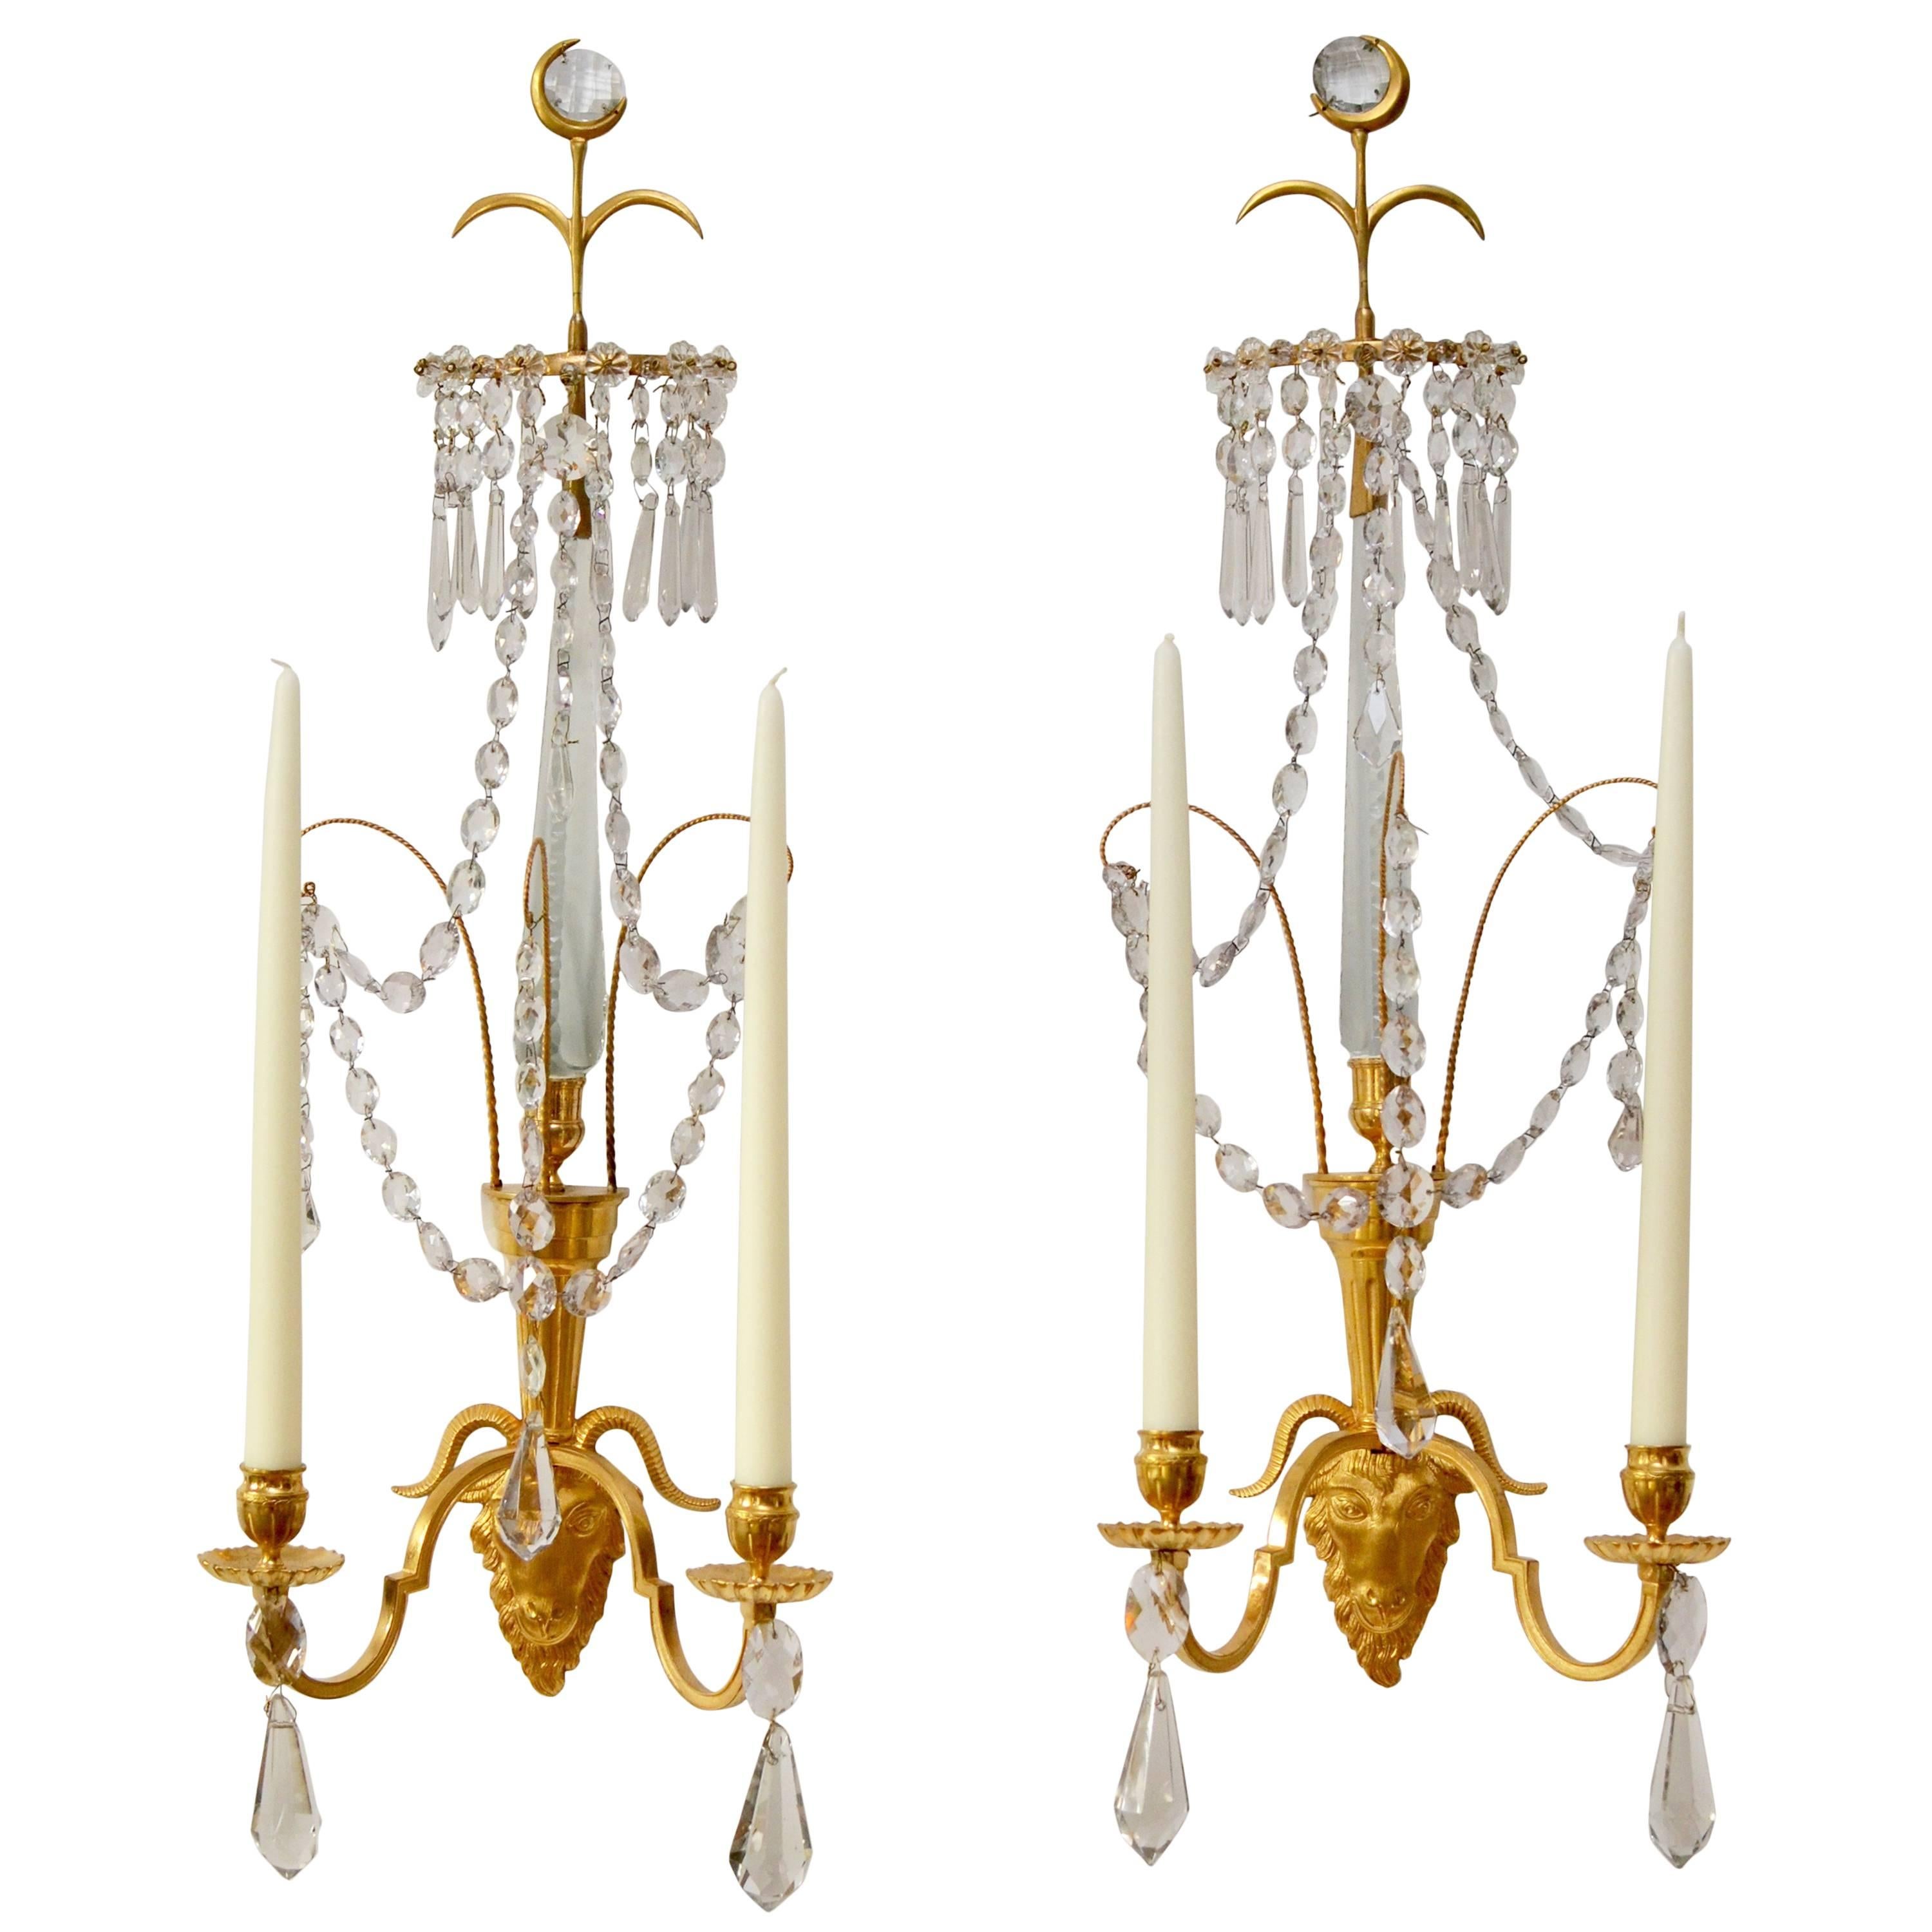 Pair of Swedish Gilt Bronze and Crystal Wall Lights, Late 18th Century